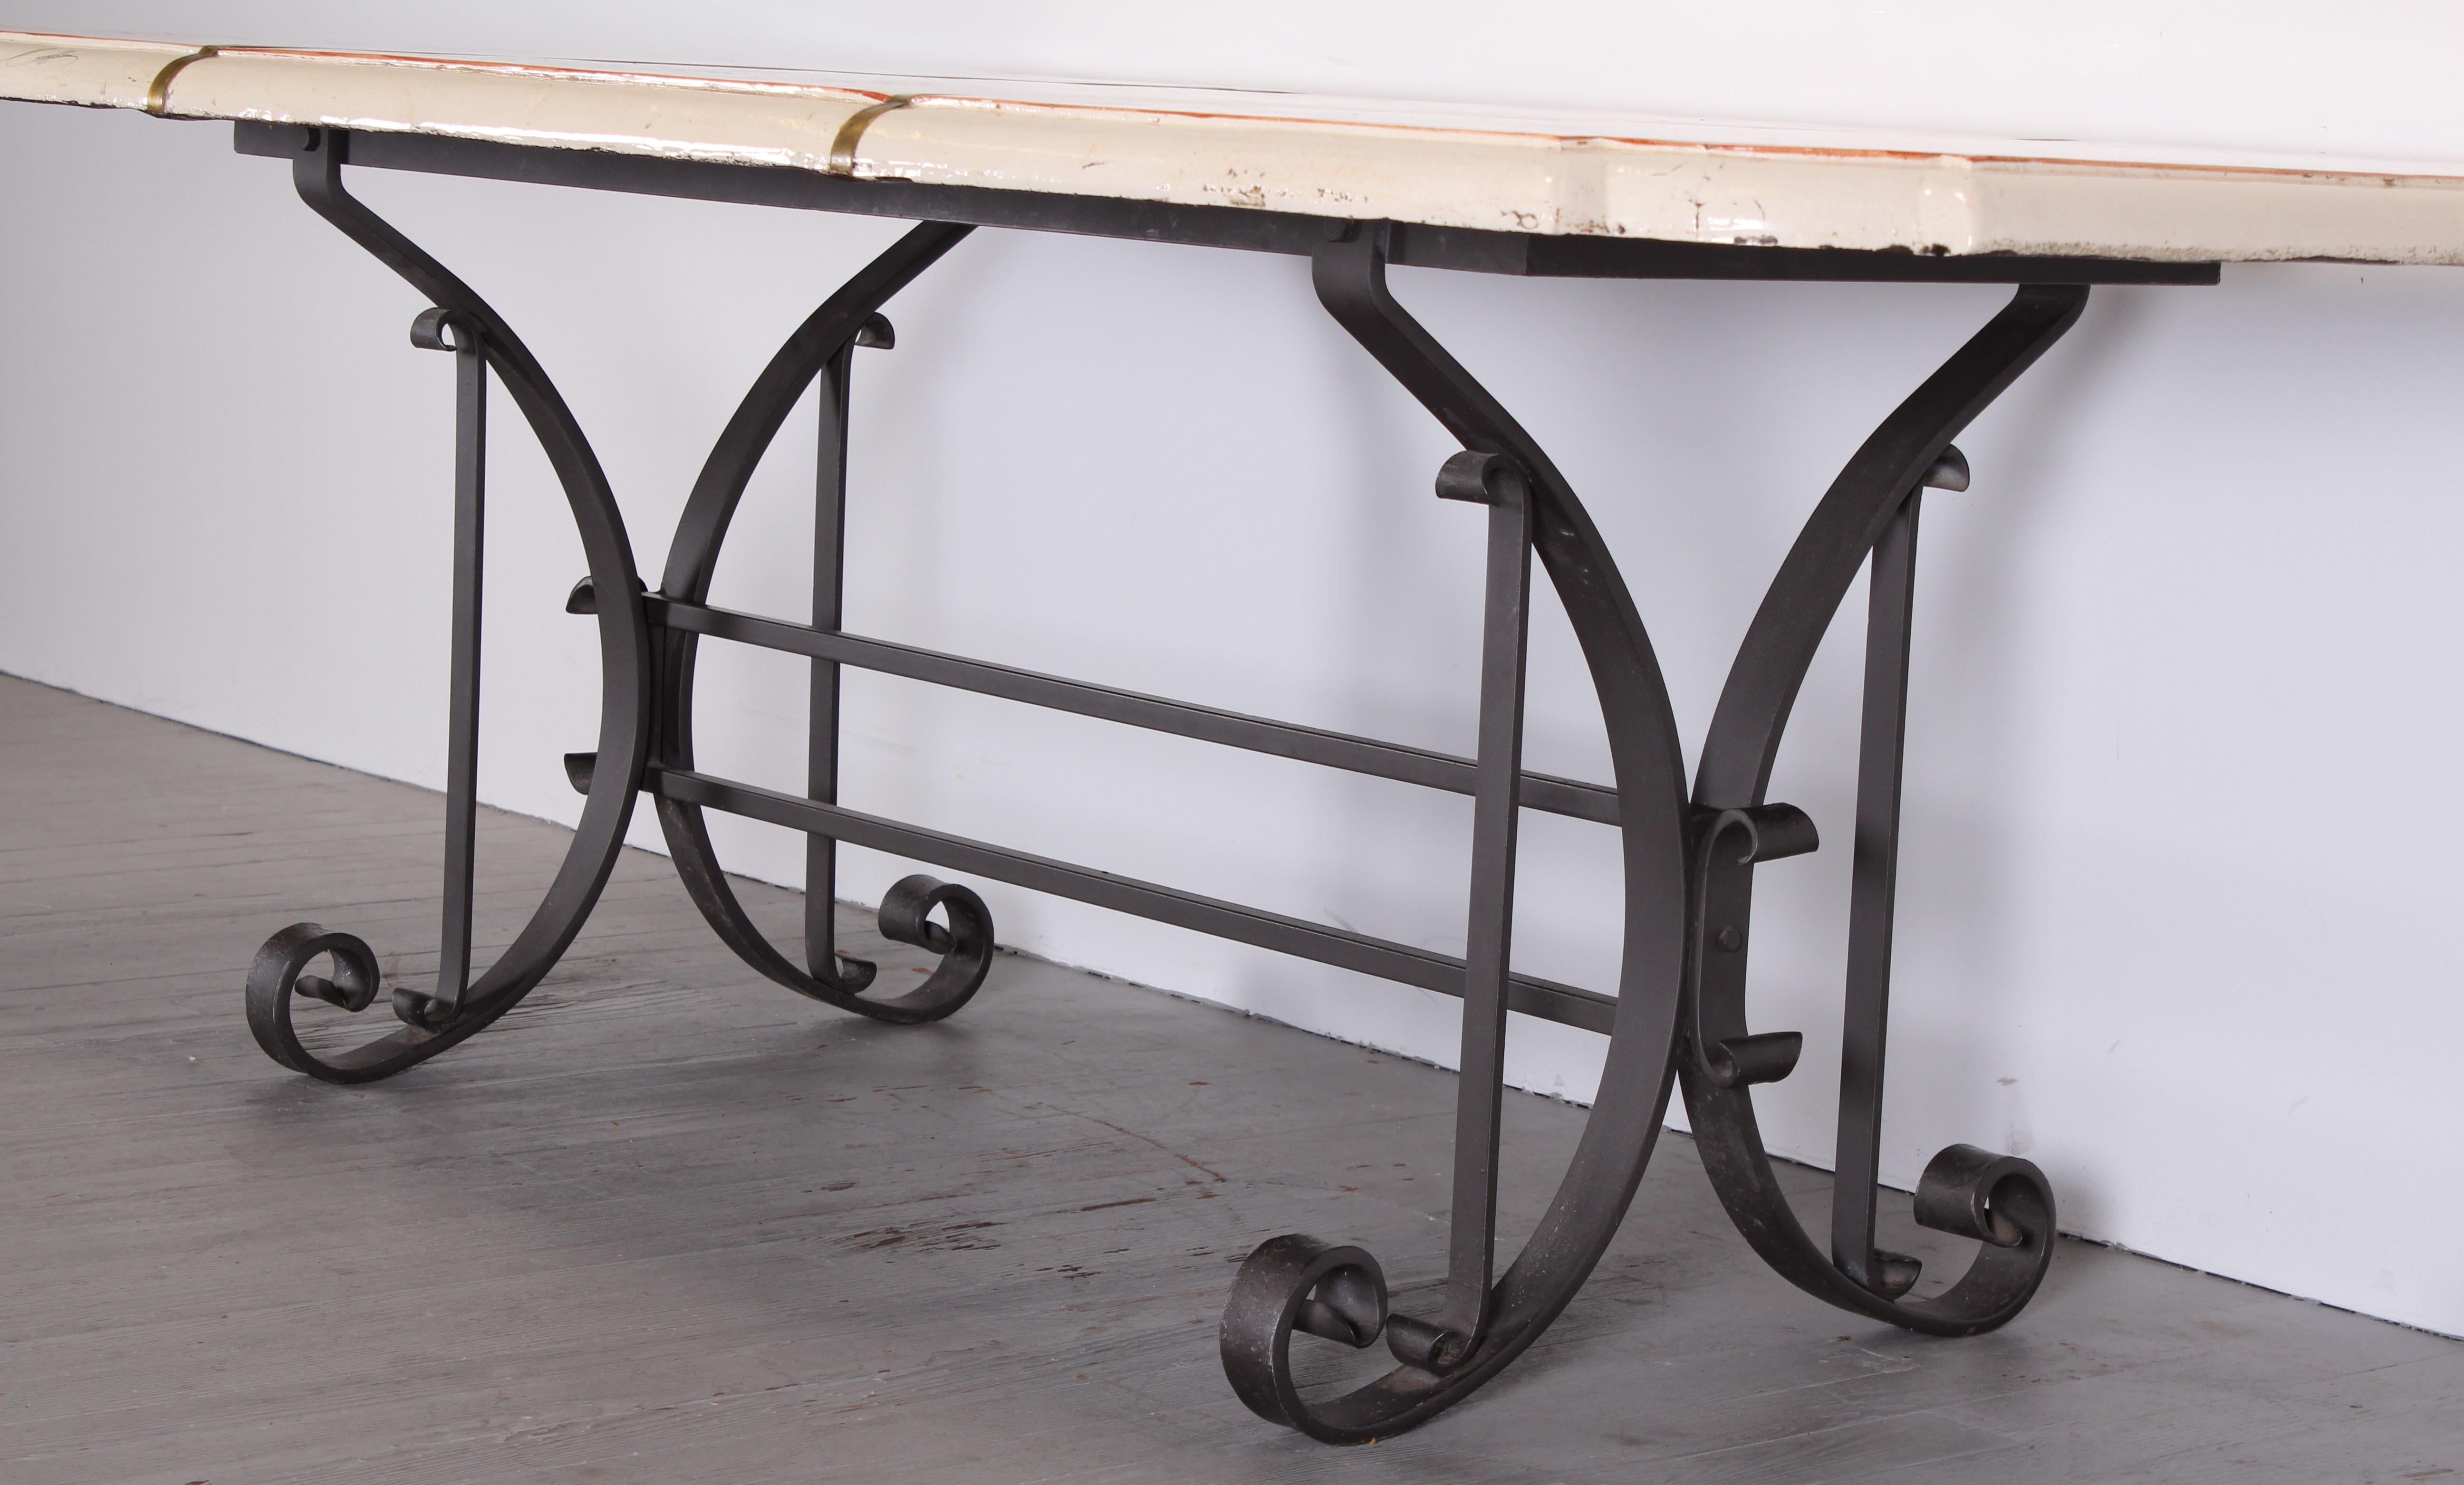 A wonderful hand painted ceramic Italian table with inset brass straps on a wrought iron base. Signed on the edge of the table by Ceccarelli. Some wear to ceramic as shown in images that fits the character of the table giving it an antiqued look. We